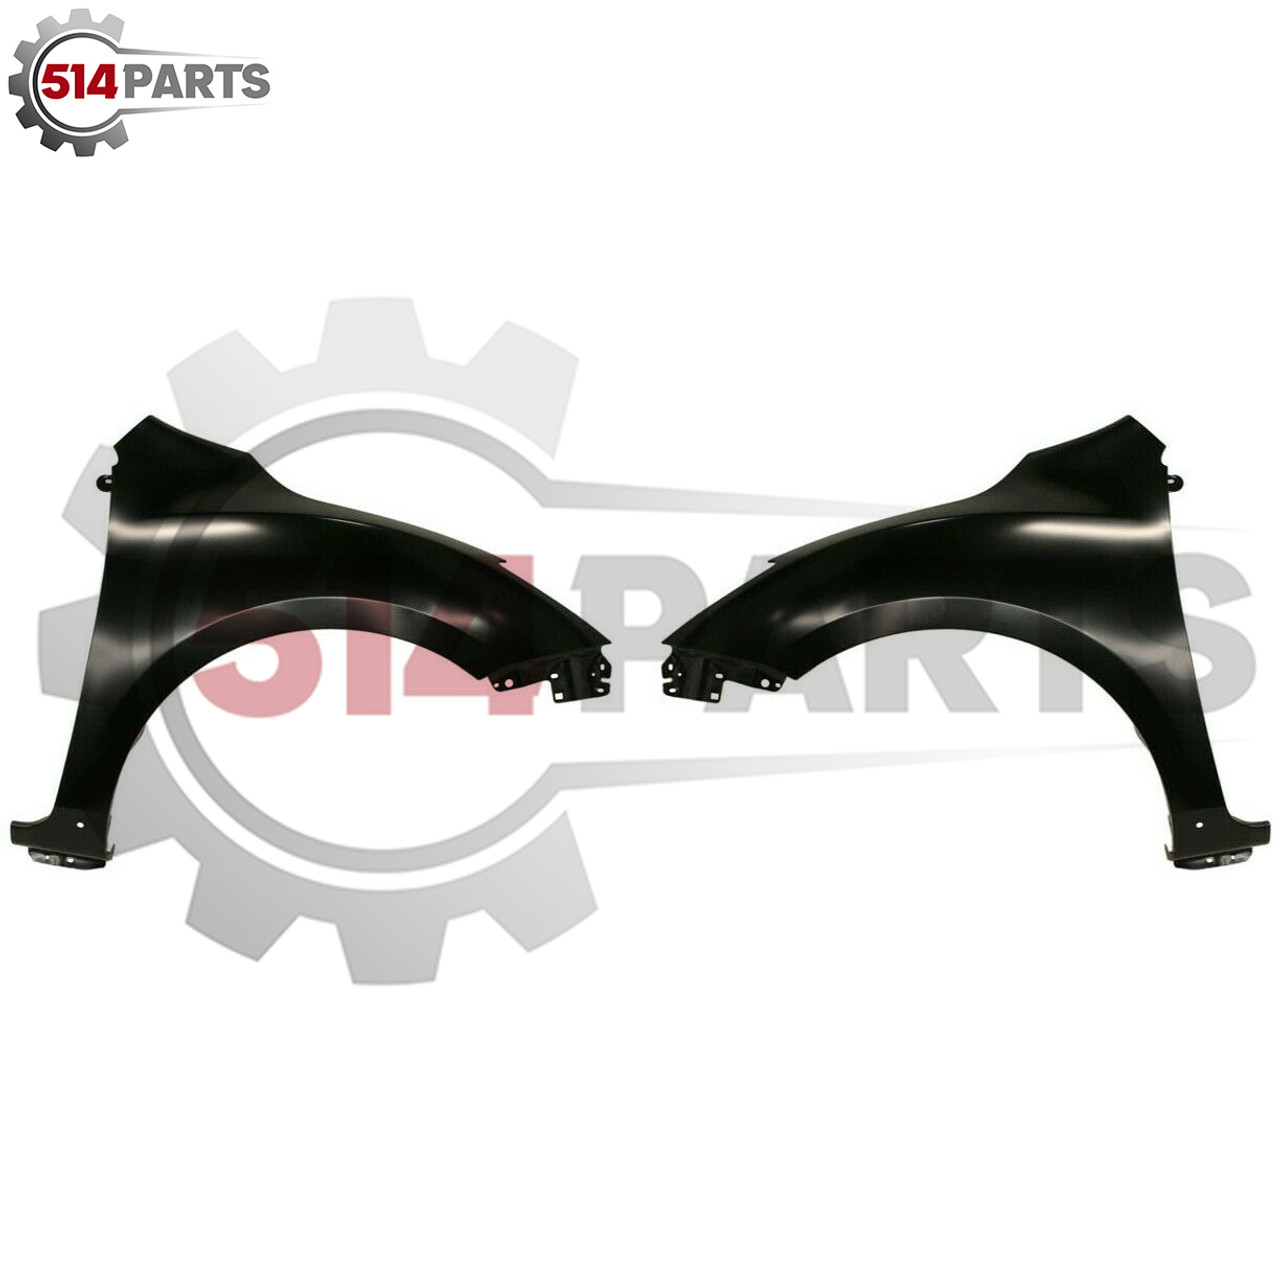 2010 - 2013 MAZDA 3 and MAZDA 3 SPORT(CANADA) CAPA Certified FRONT FENDERS with MOULDING HOLE, without SIGNAL LAMP HOLE - AILES AVANT avec TROU DE MOULAGE, sans TROU DE FEU DE SIGNALISATION CAPA Certifiee